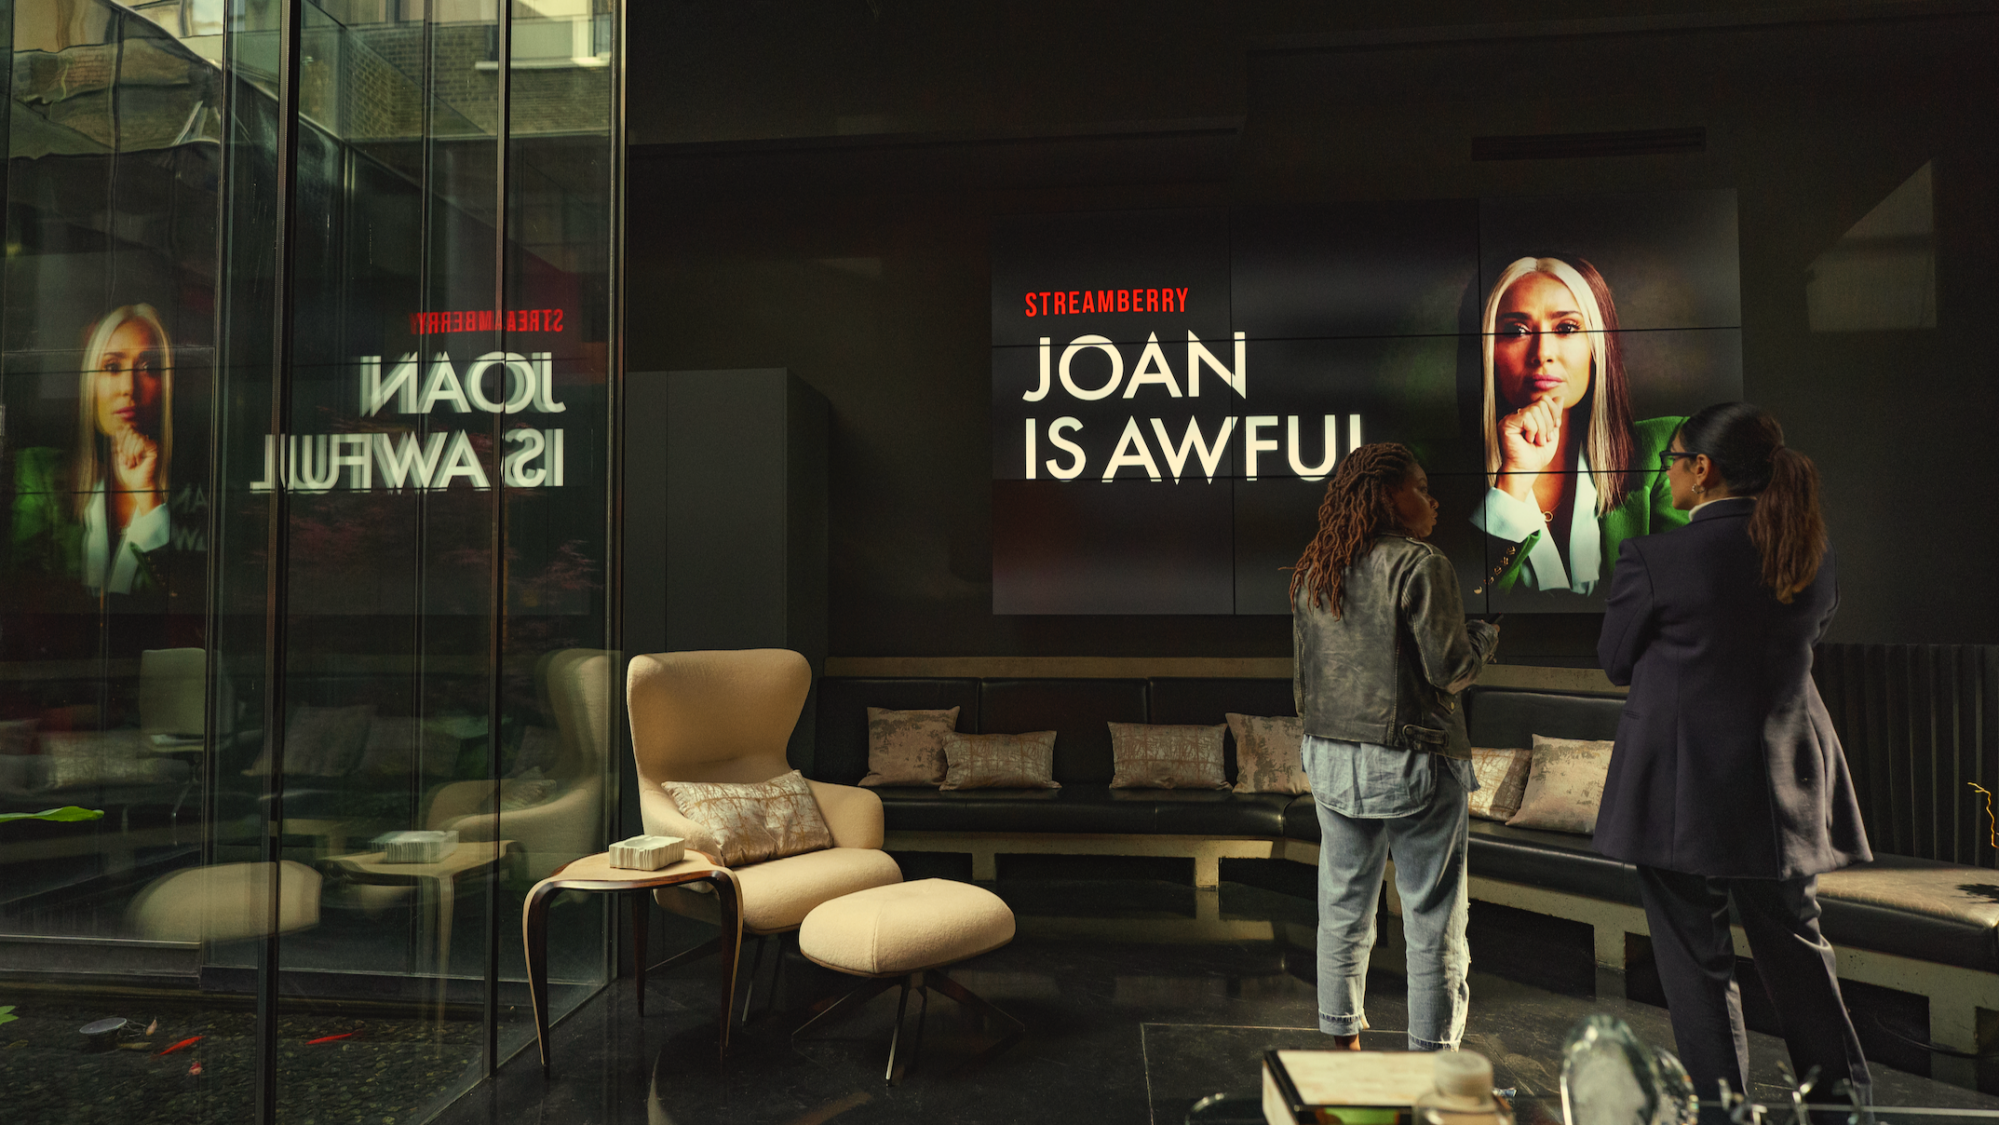 Two women stand in a conference room in front of a TV screen that says "Joan is Awful."